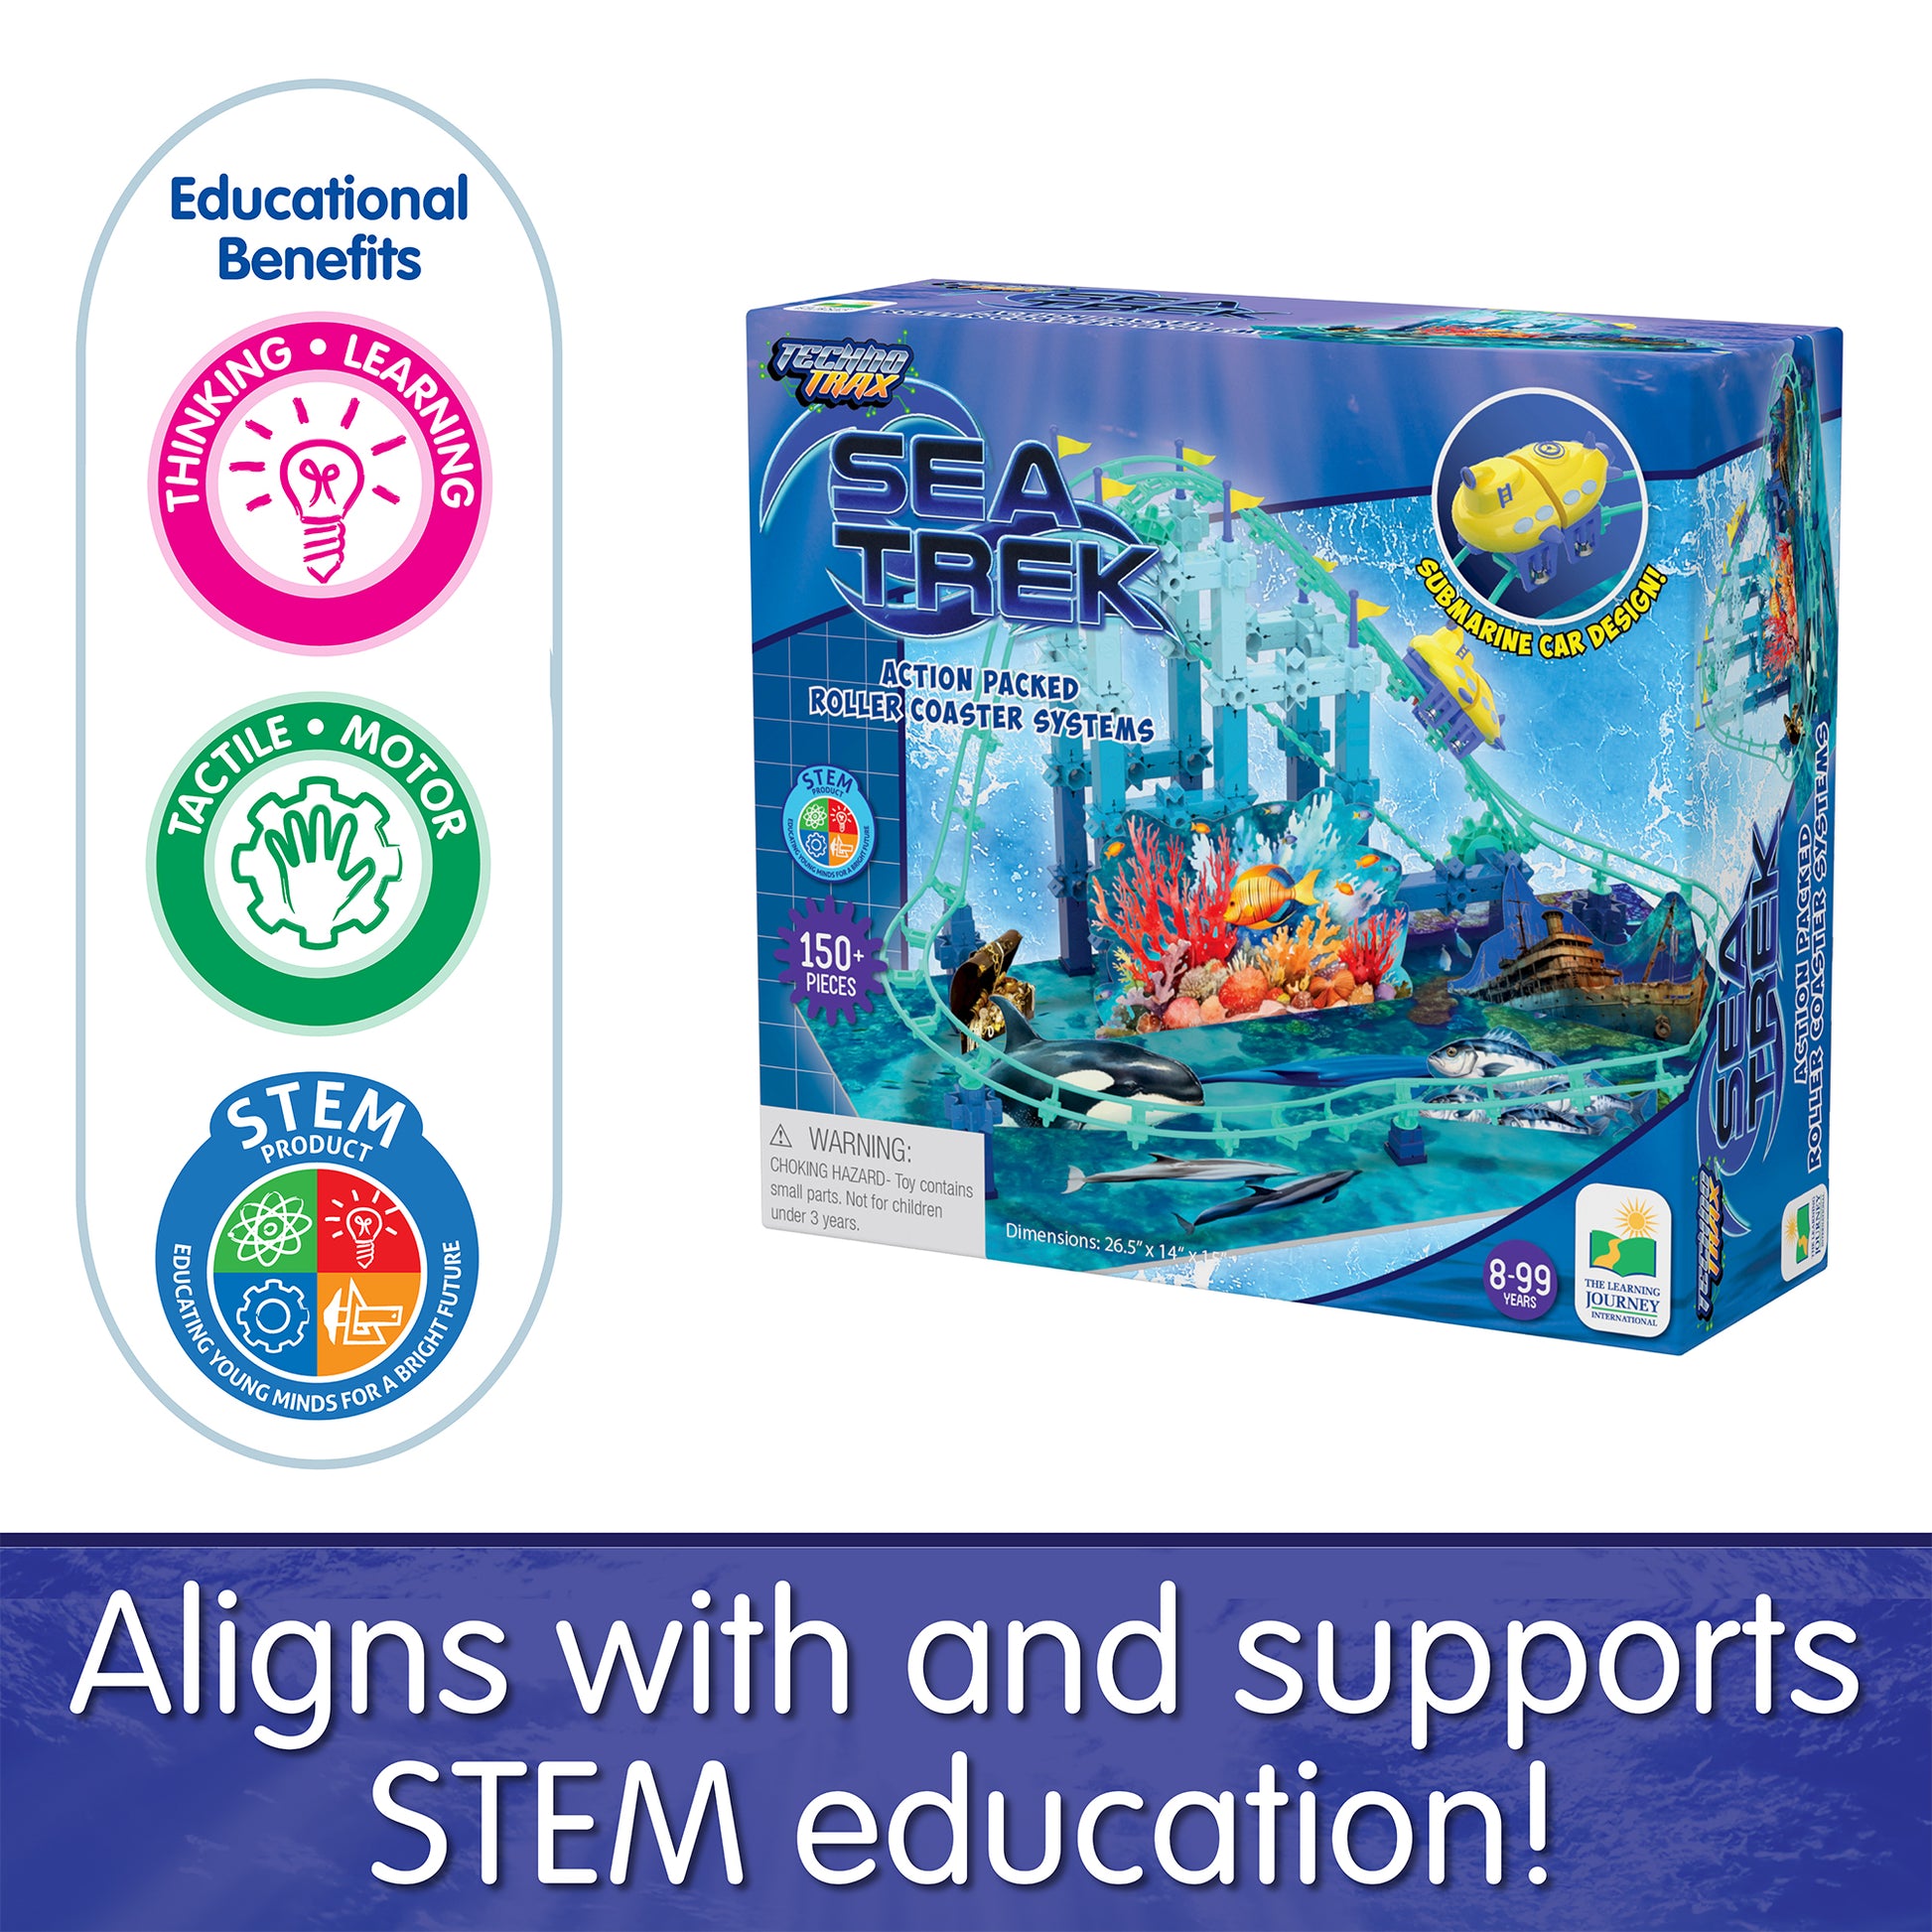 Infographic about Sea Trek's educational benefits